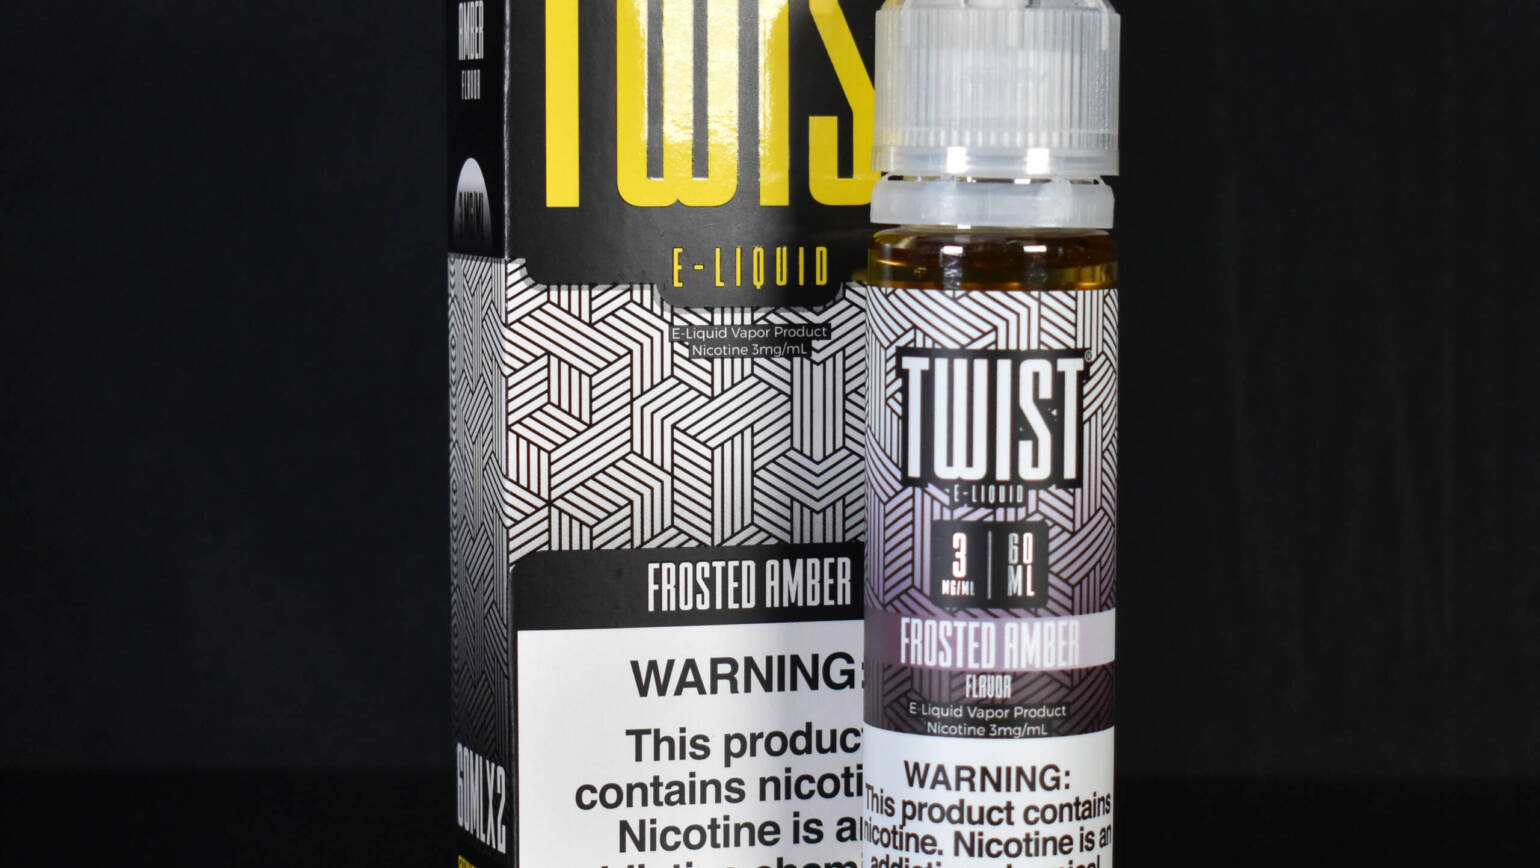 TWISTED E-Liquid – Frosted Amber